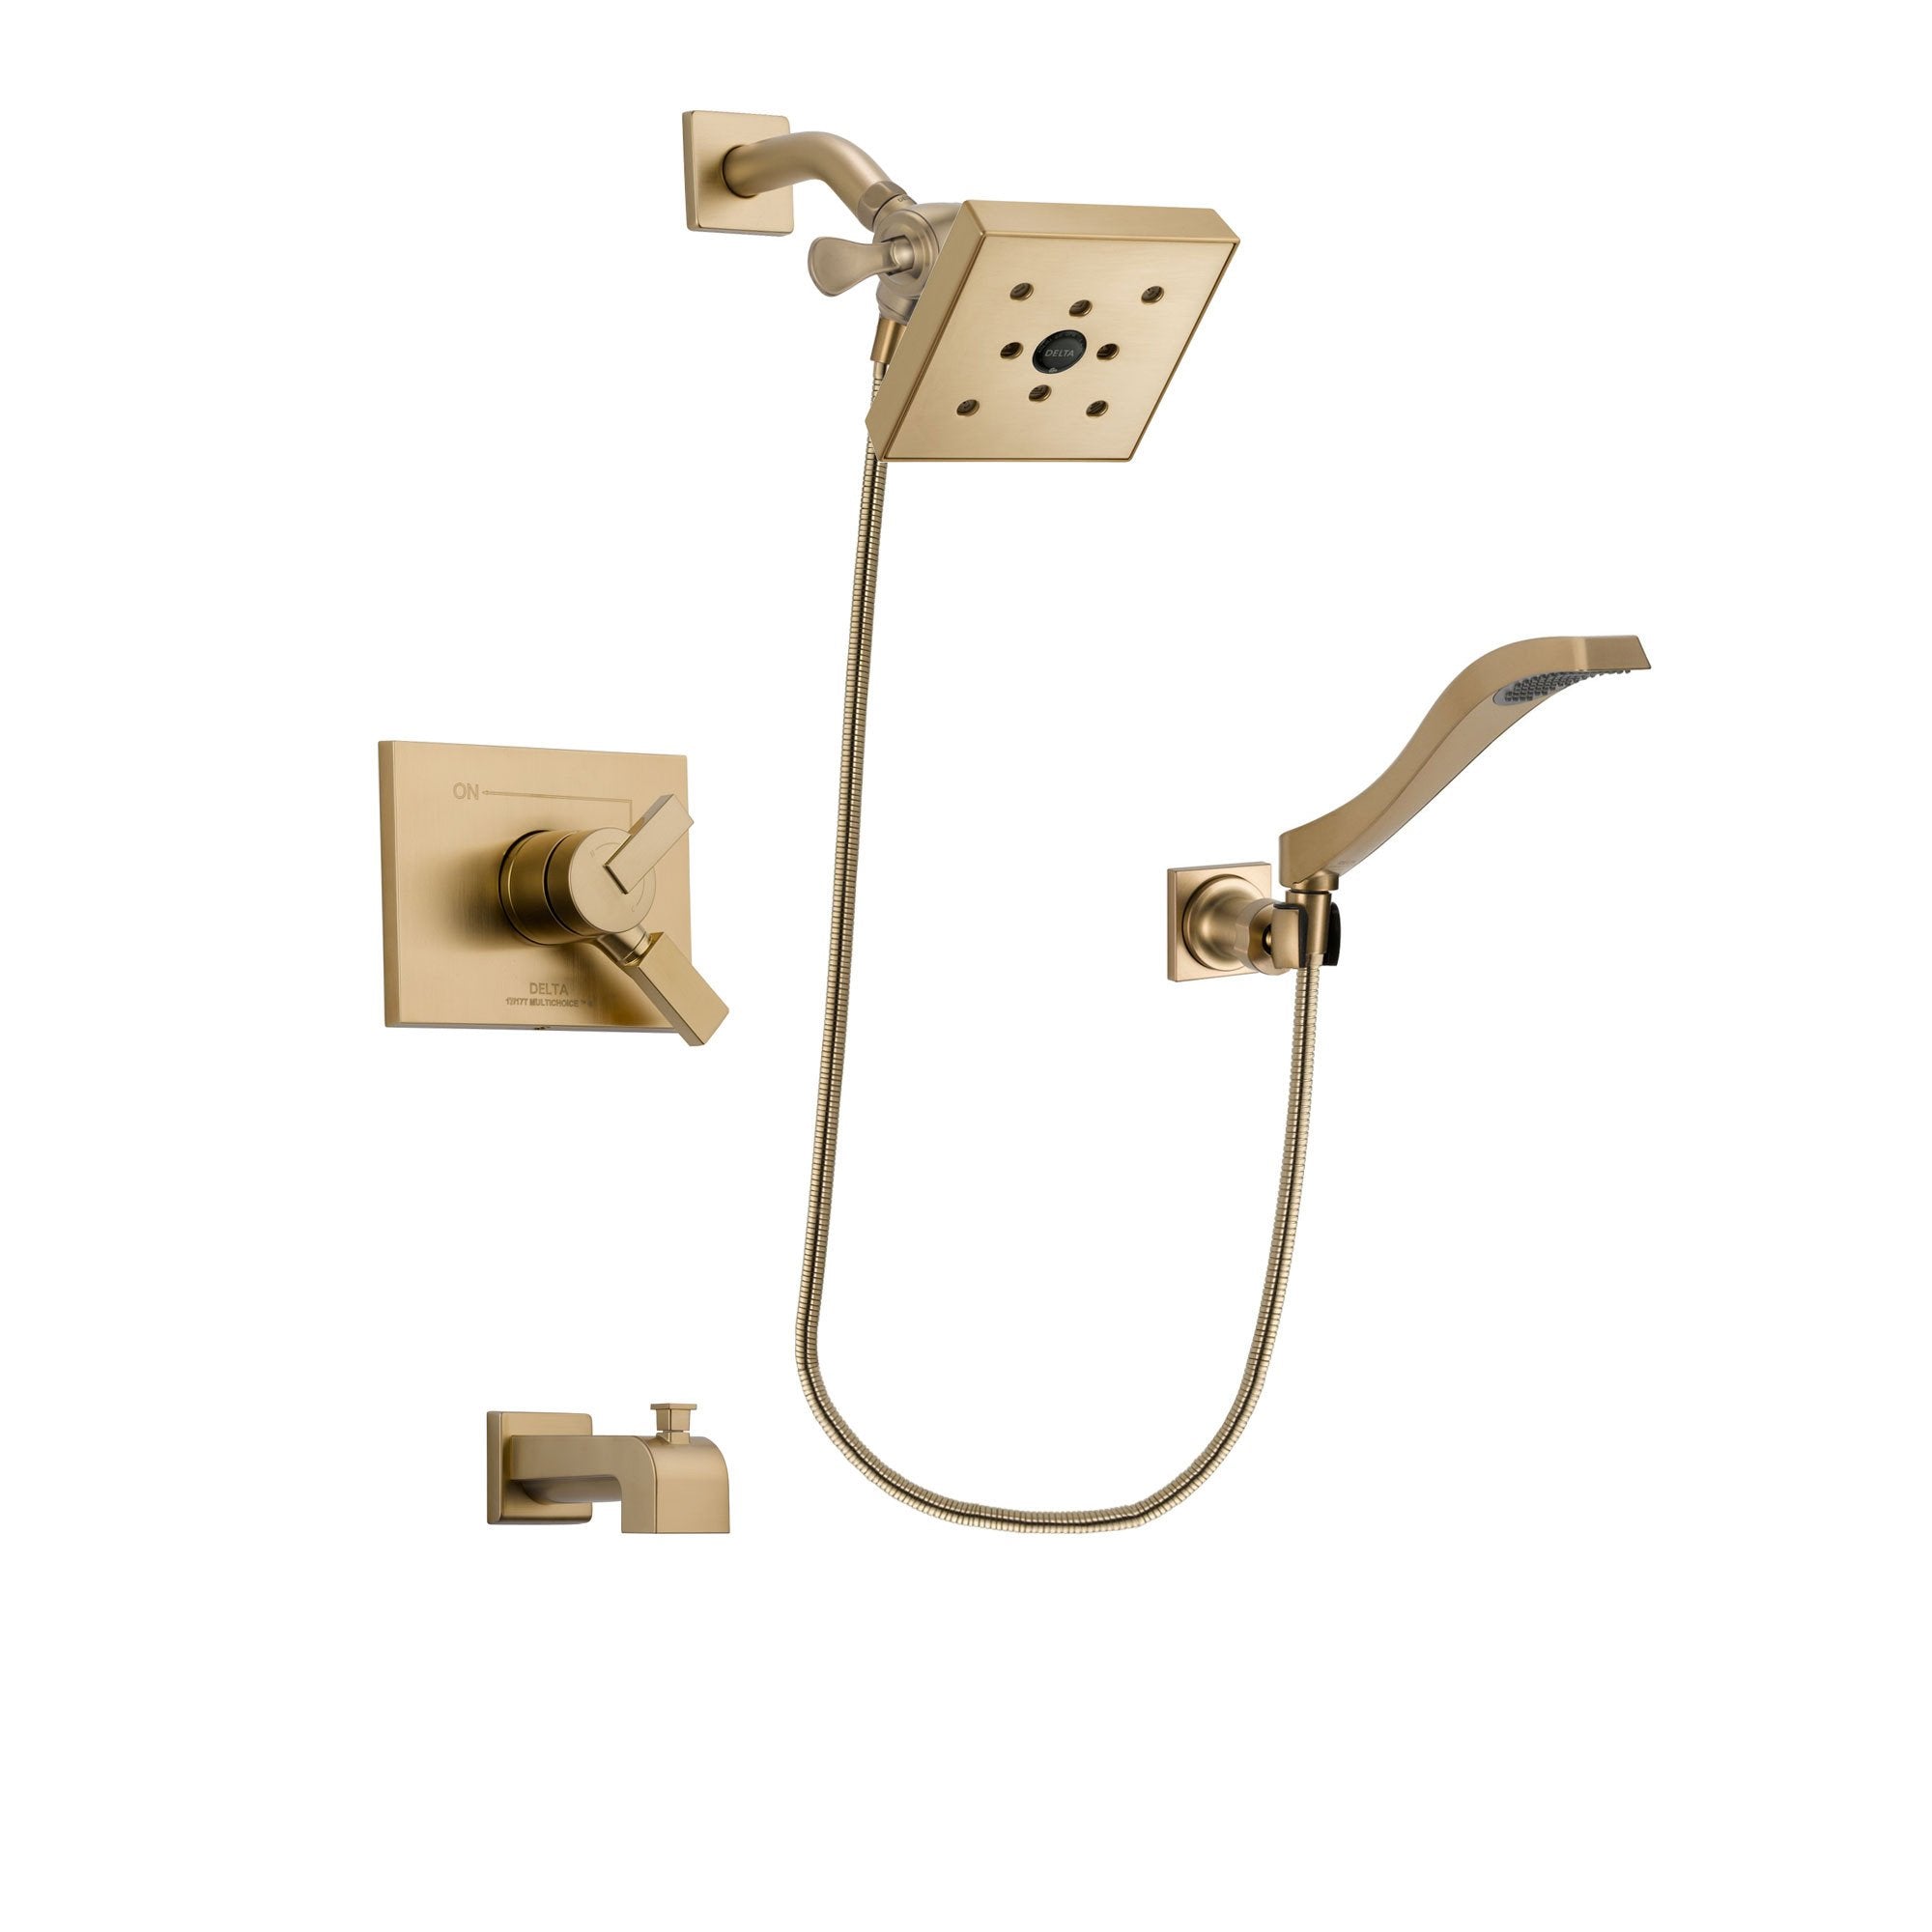 Delta Vero Champagne Bronze Finish Dual Control Tub and Shower Faucet System Package with Square Shower Head and Modern Wall Mount Handheld Shower Spray Includes Rough-in Valve and Tub Spout DSP3871V